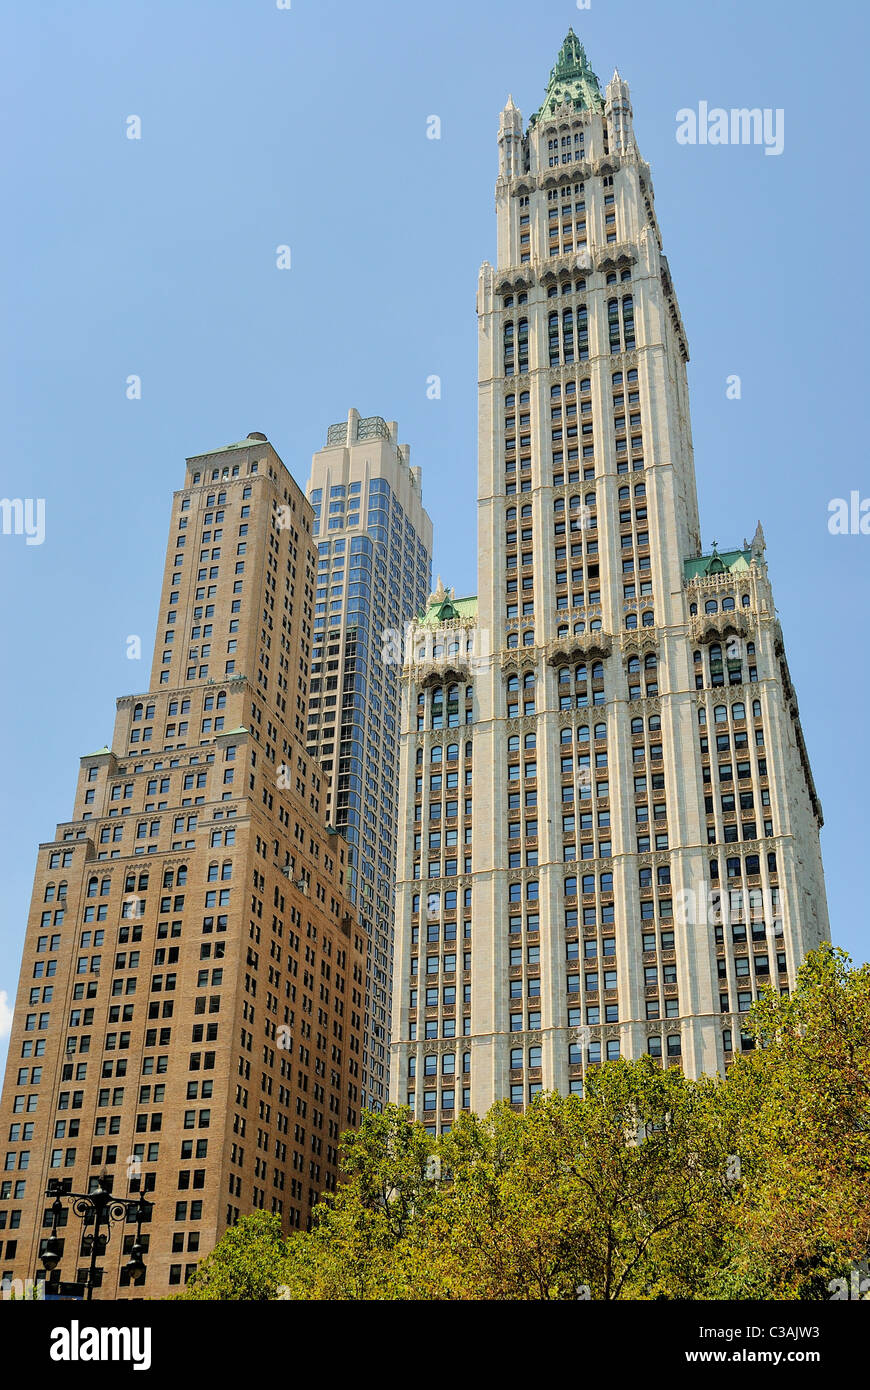 woolworth building in new york city Stock Photo